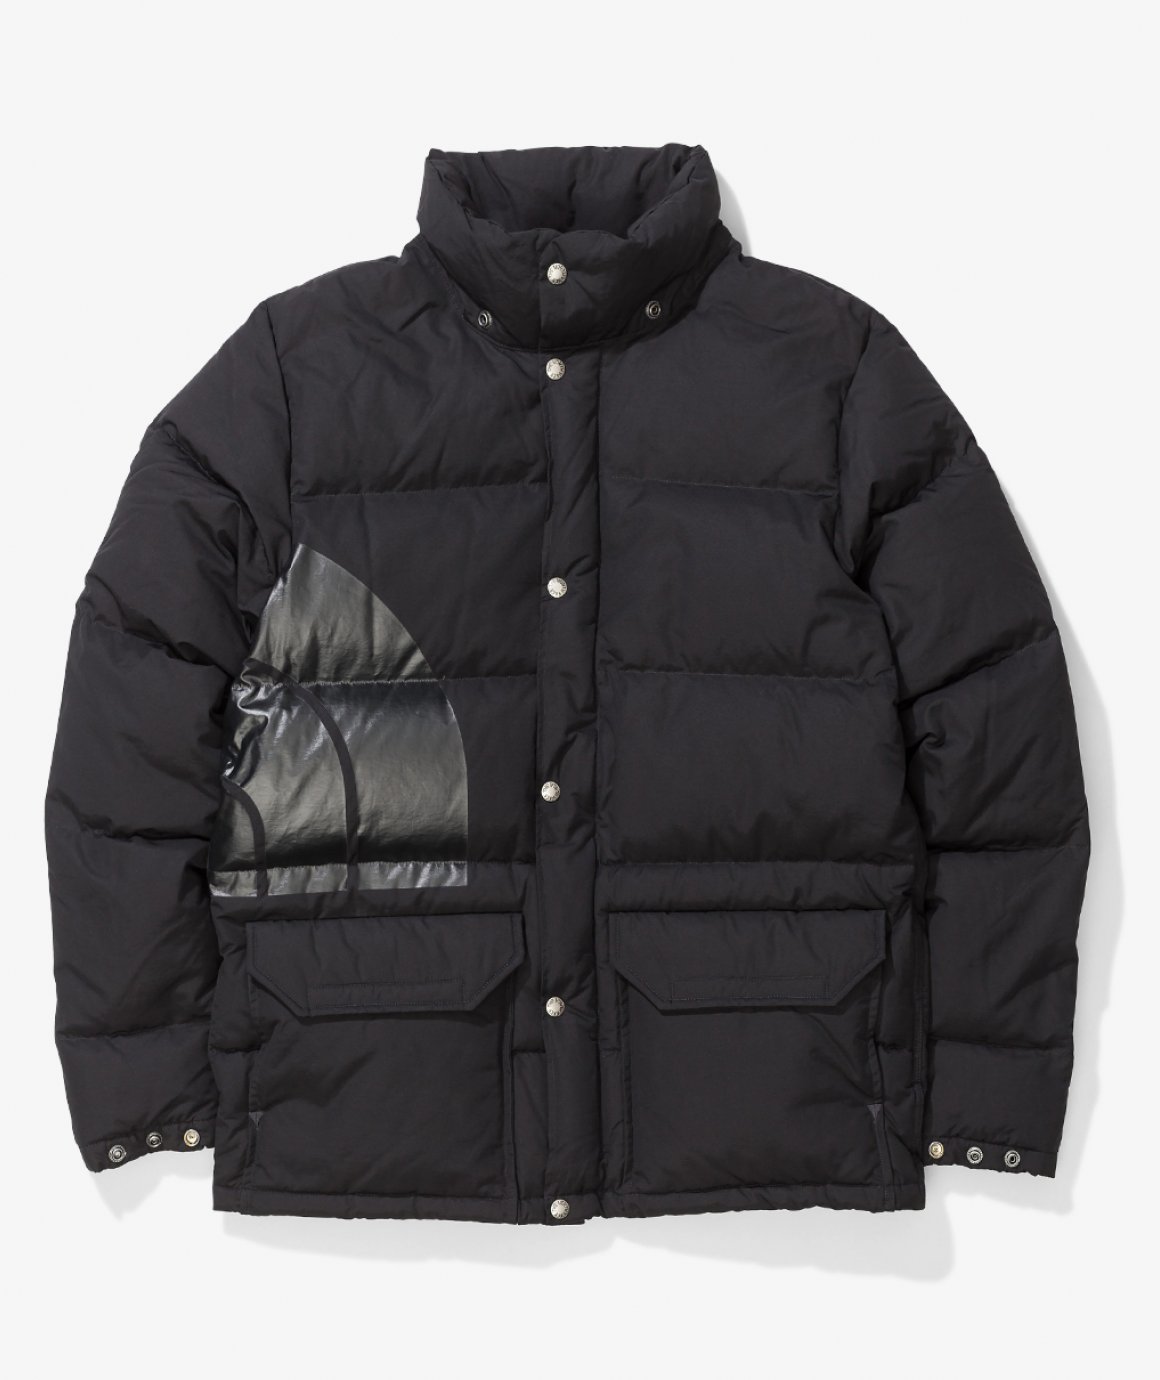 Junya Watanabe MAN and The North Face brings back an iconic puffer 